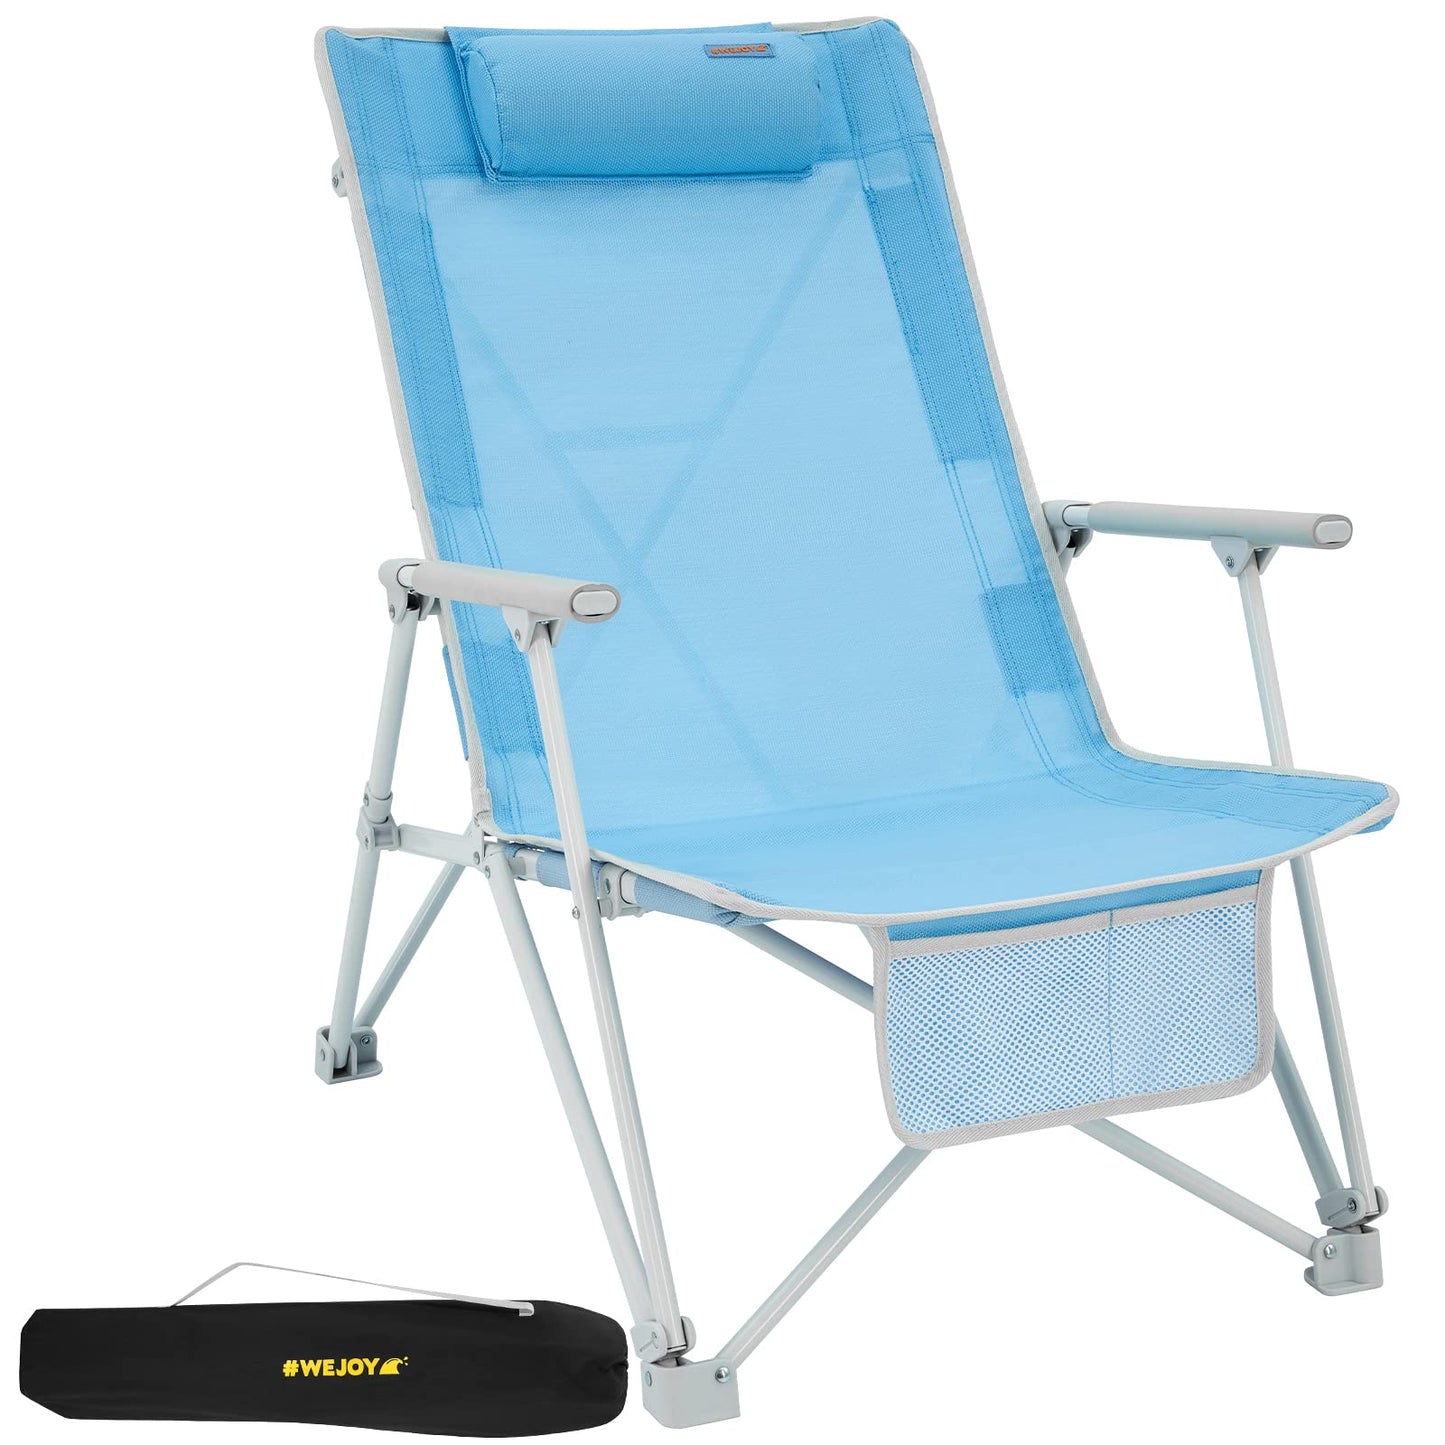 WEJOY 2 Pack Portable High Back Folding Beach Chair